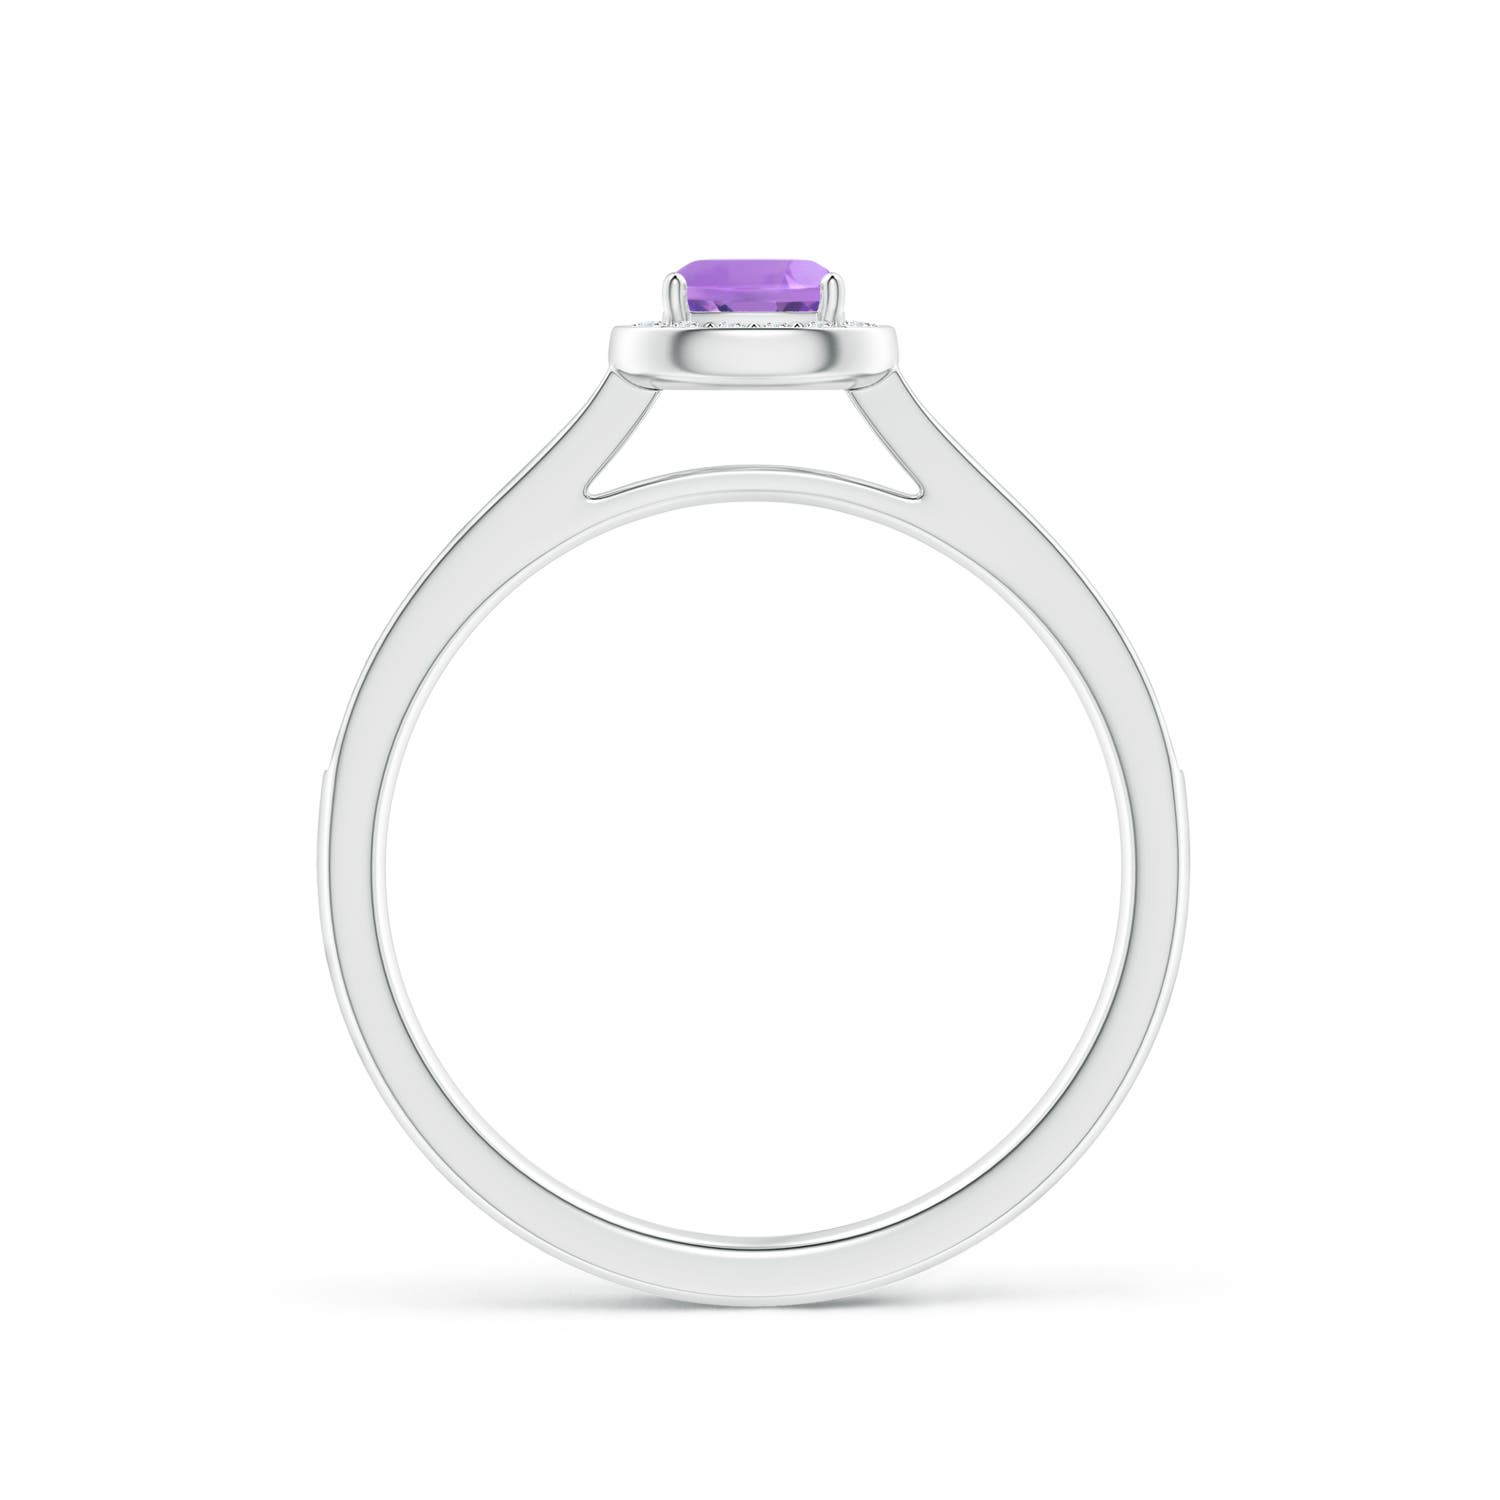 A - Amethyst / 0.49 CT / 14 KT White Gold